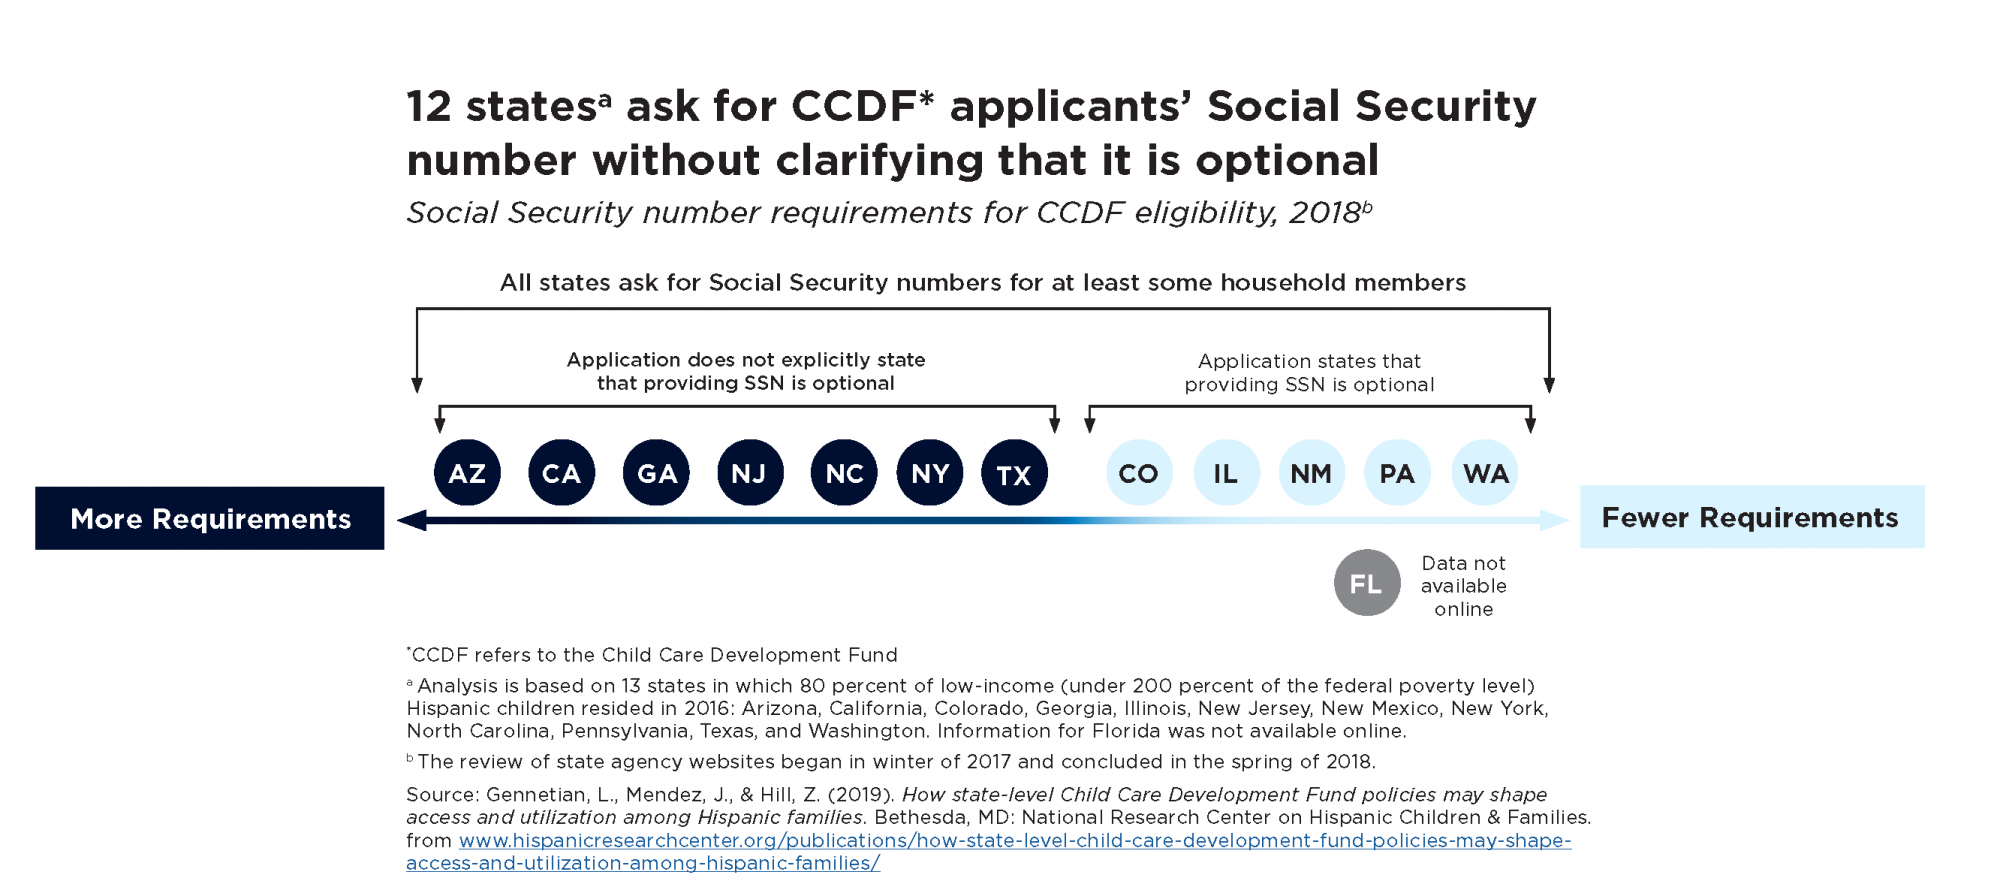 12 states ask for CCDF applicants' Social Security number without clarifying that it is optional